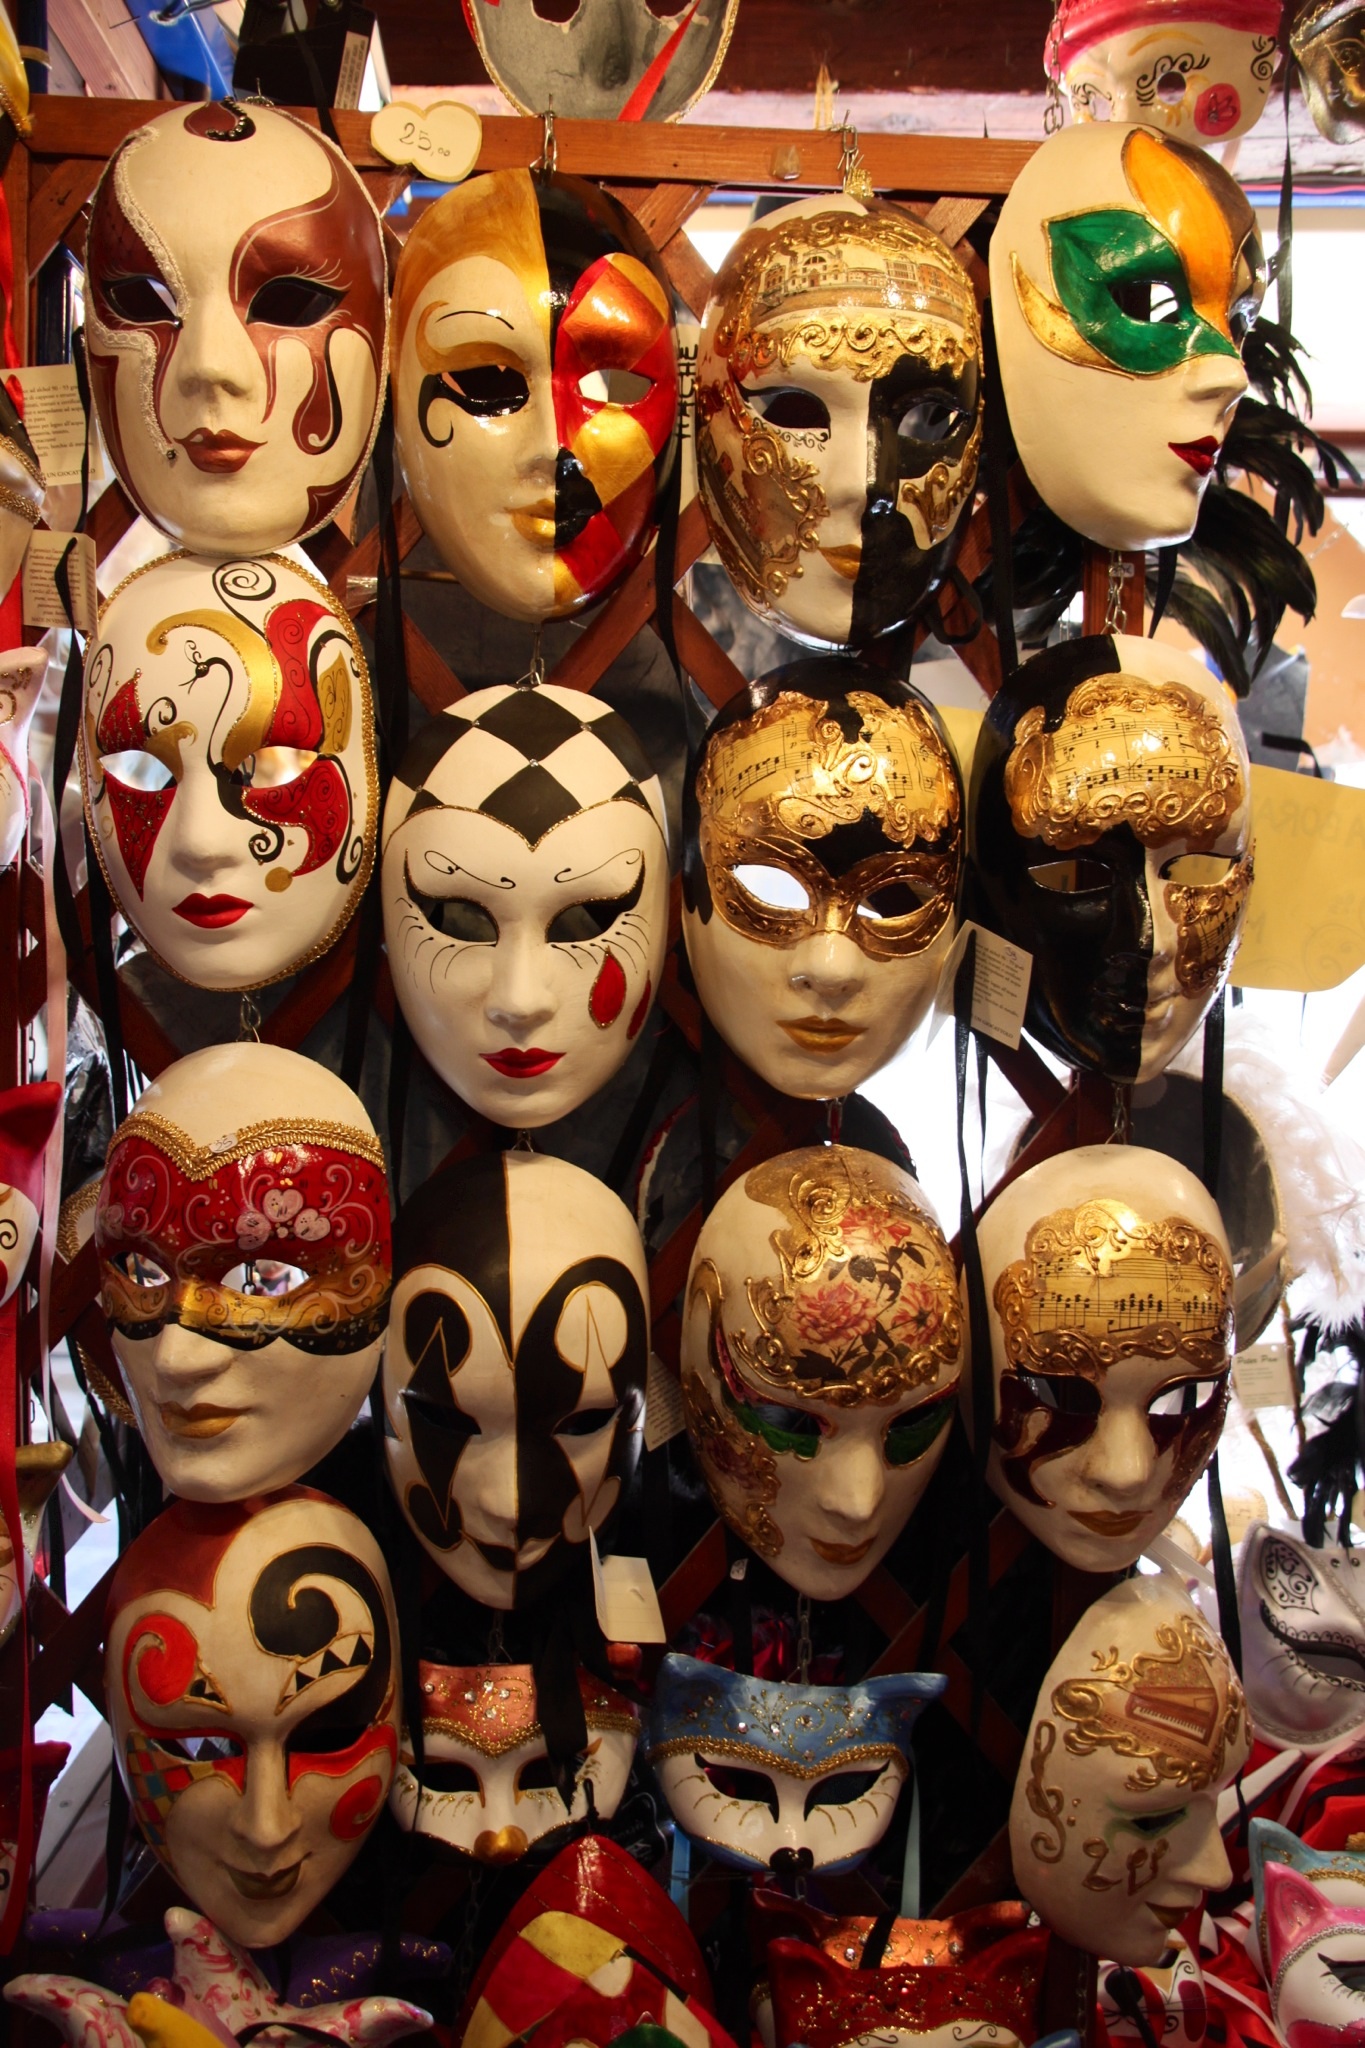 Behind the mask - Traditional mask making in Venice